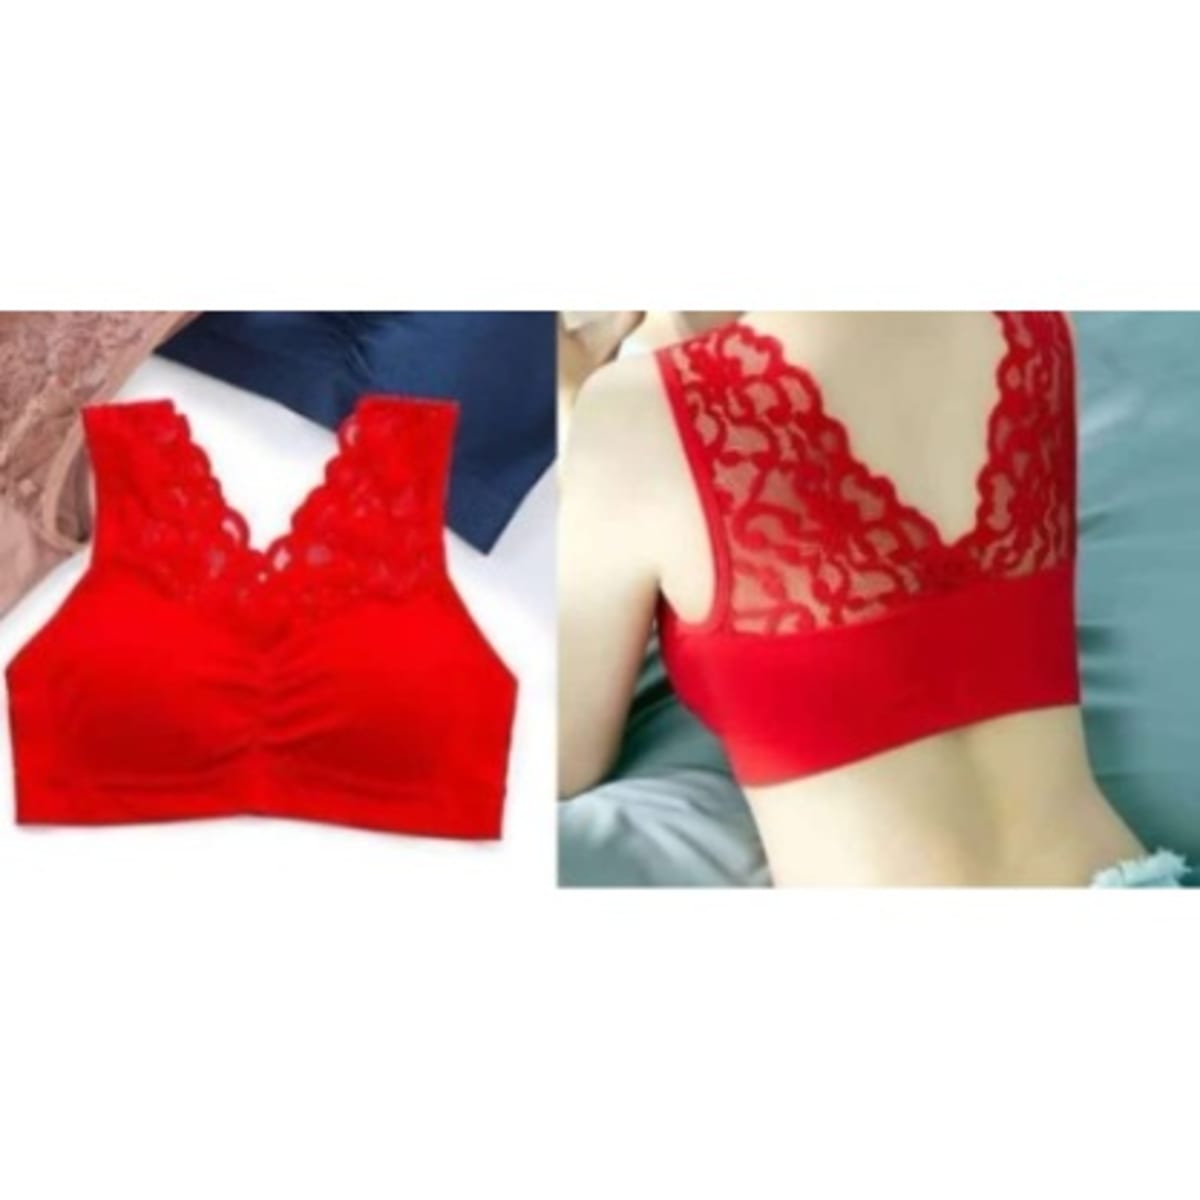 Best Deal for Lace Bralettes for Women 1 pc Lace Bra Camisole Bra for